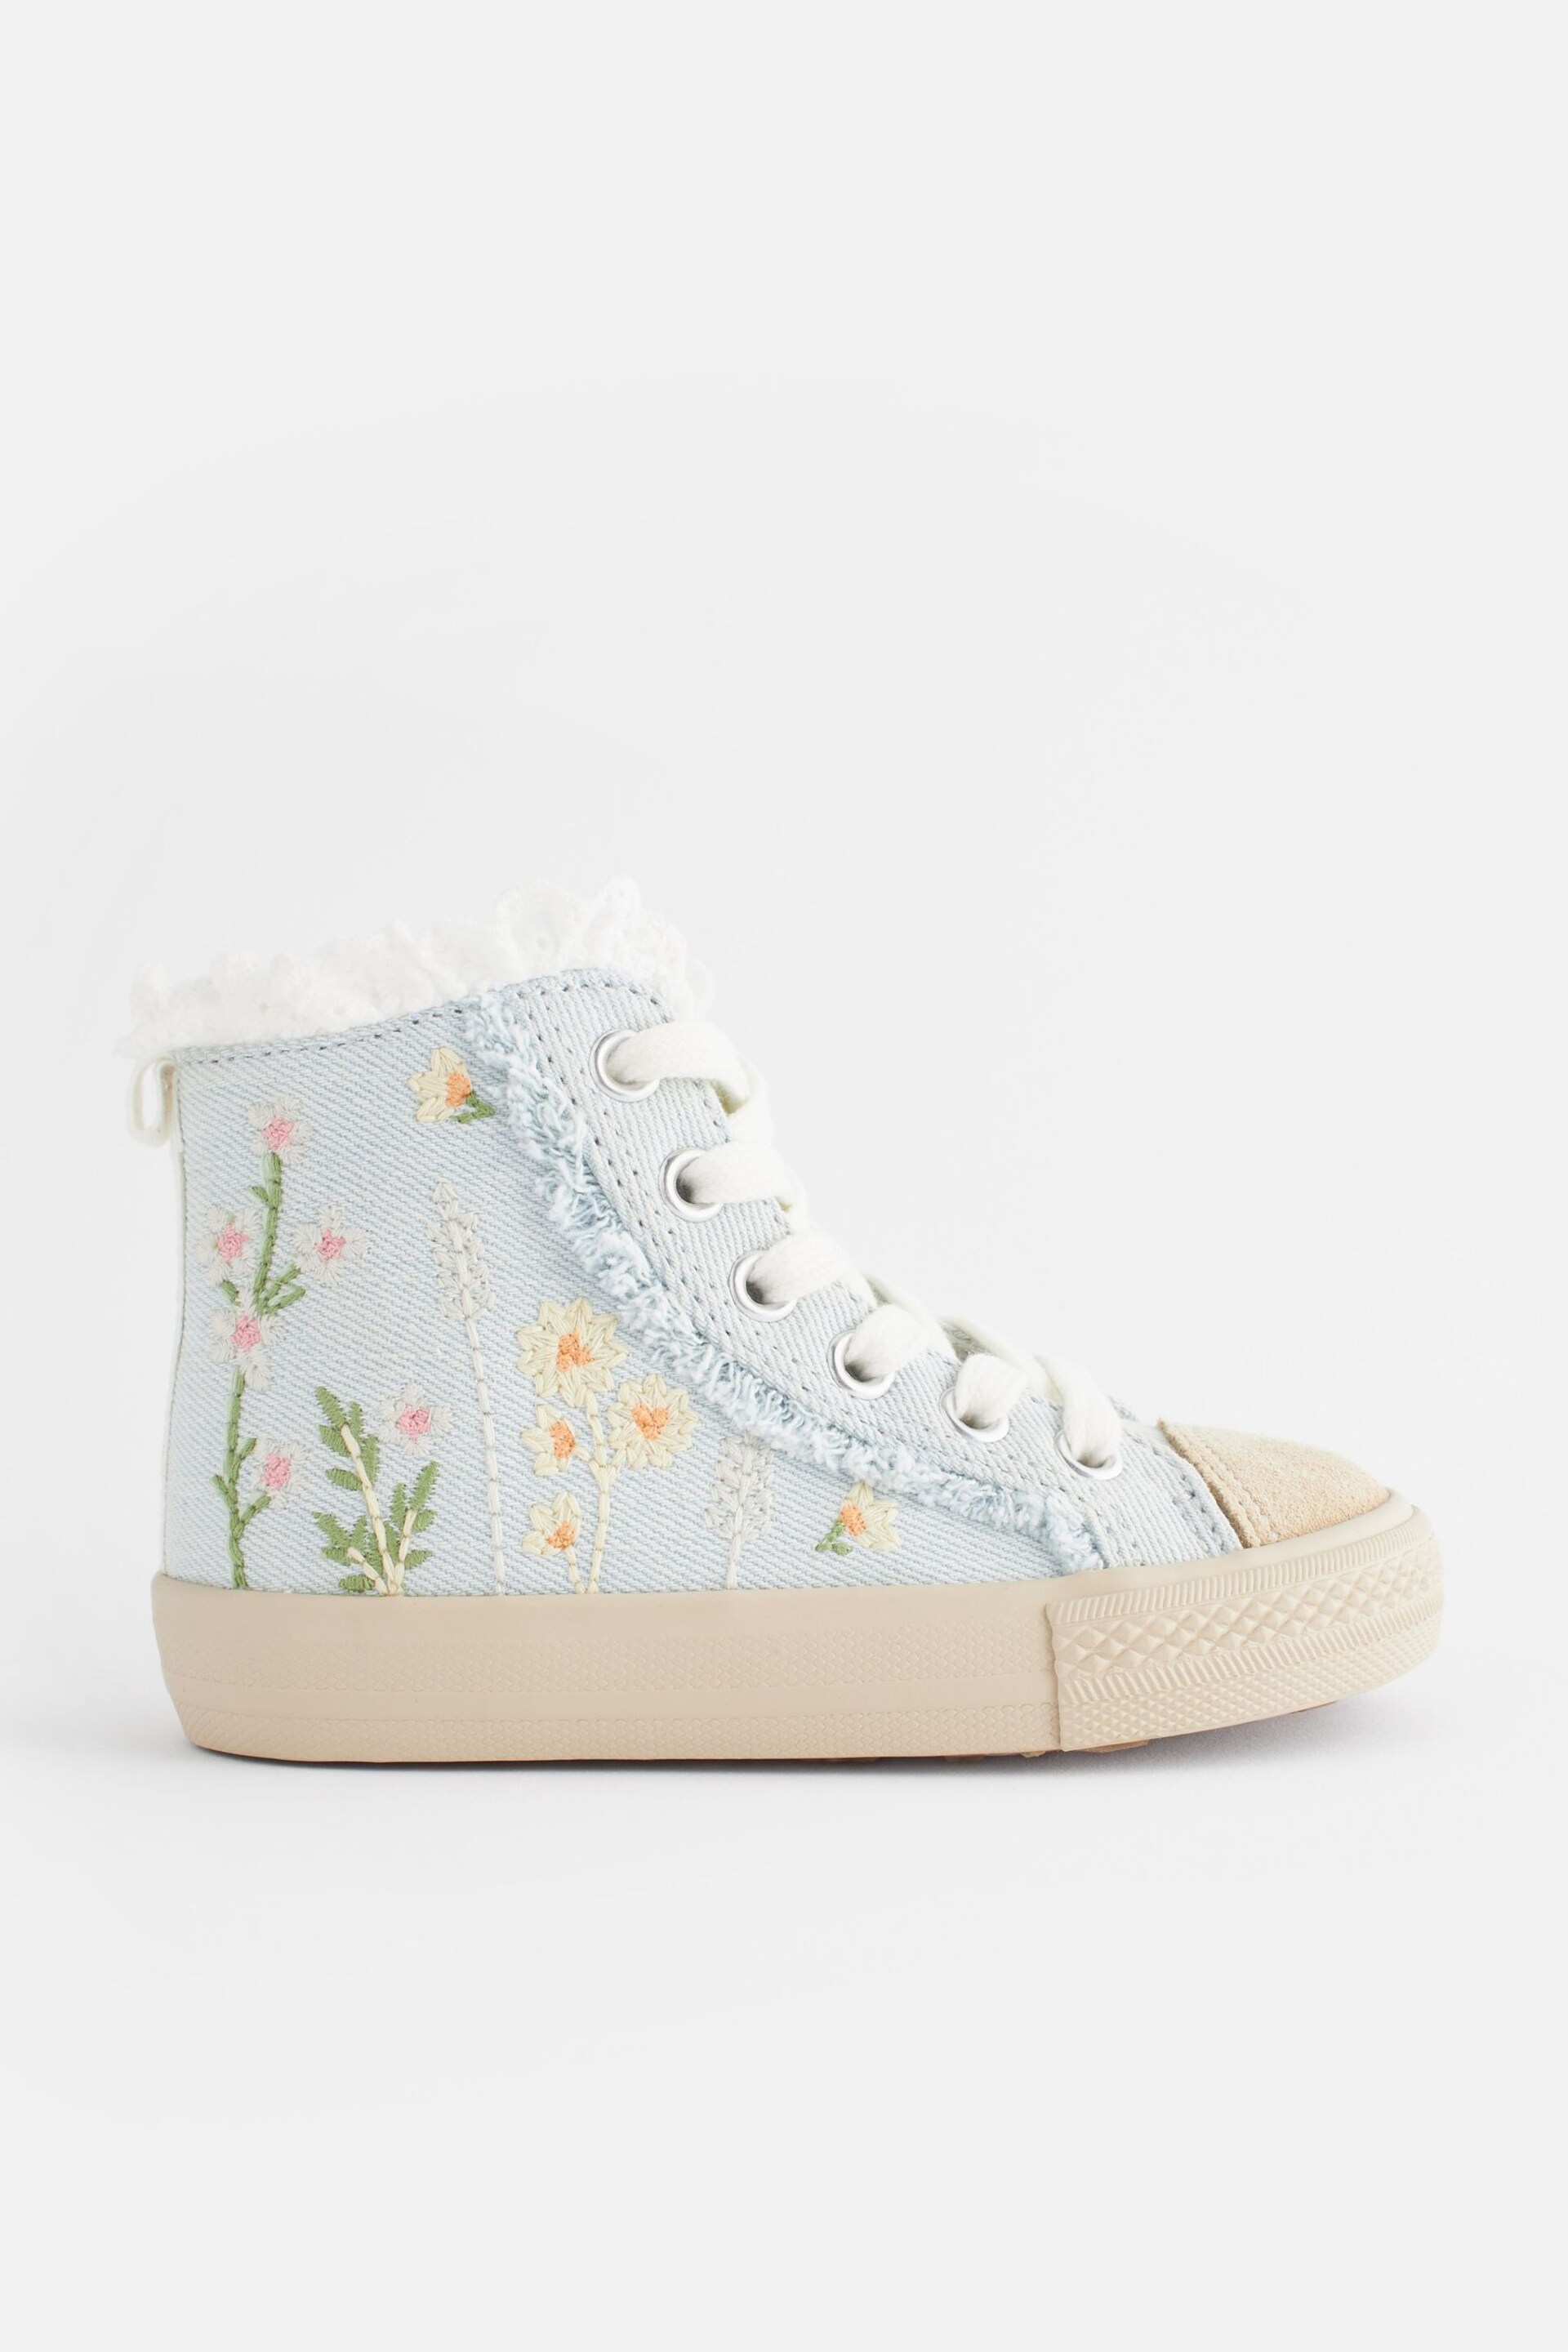 Denim Blue Embroidered High Top Trainers - Image 3 of 7